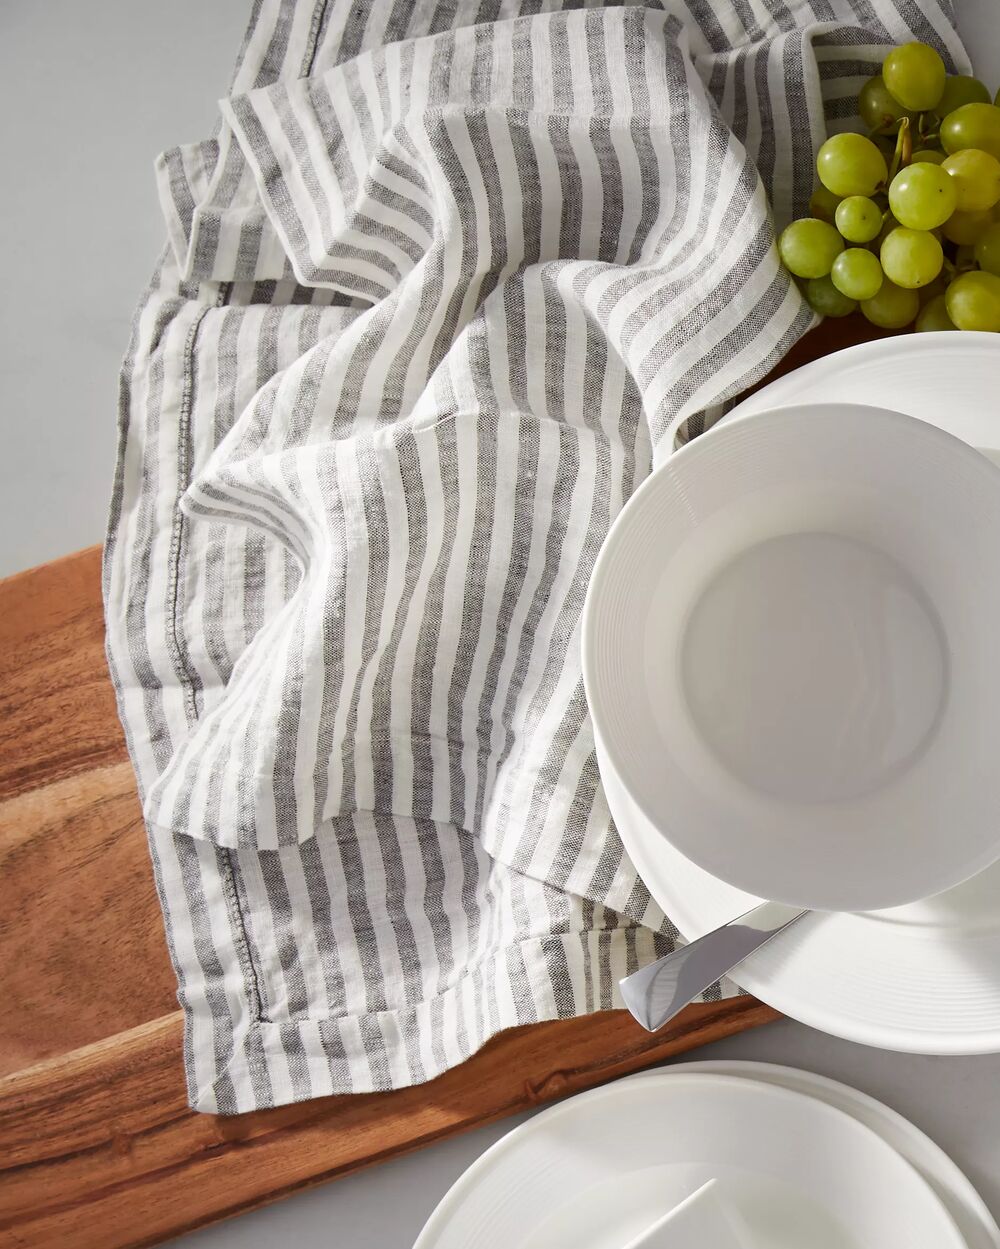 How to set a French country table linen napkins